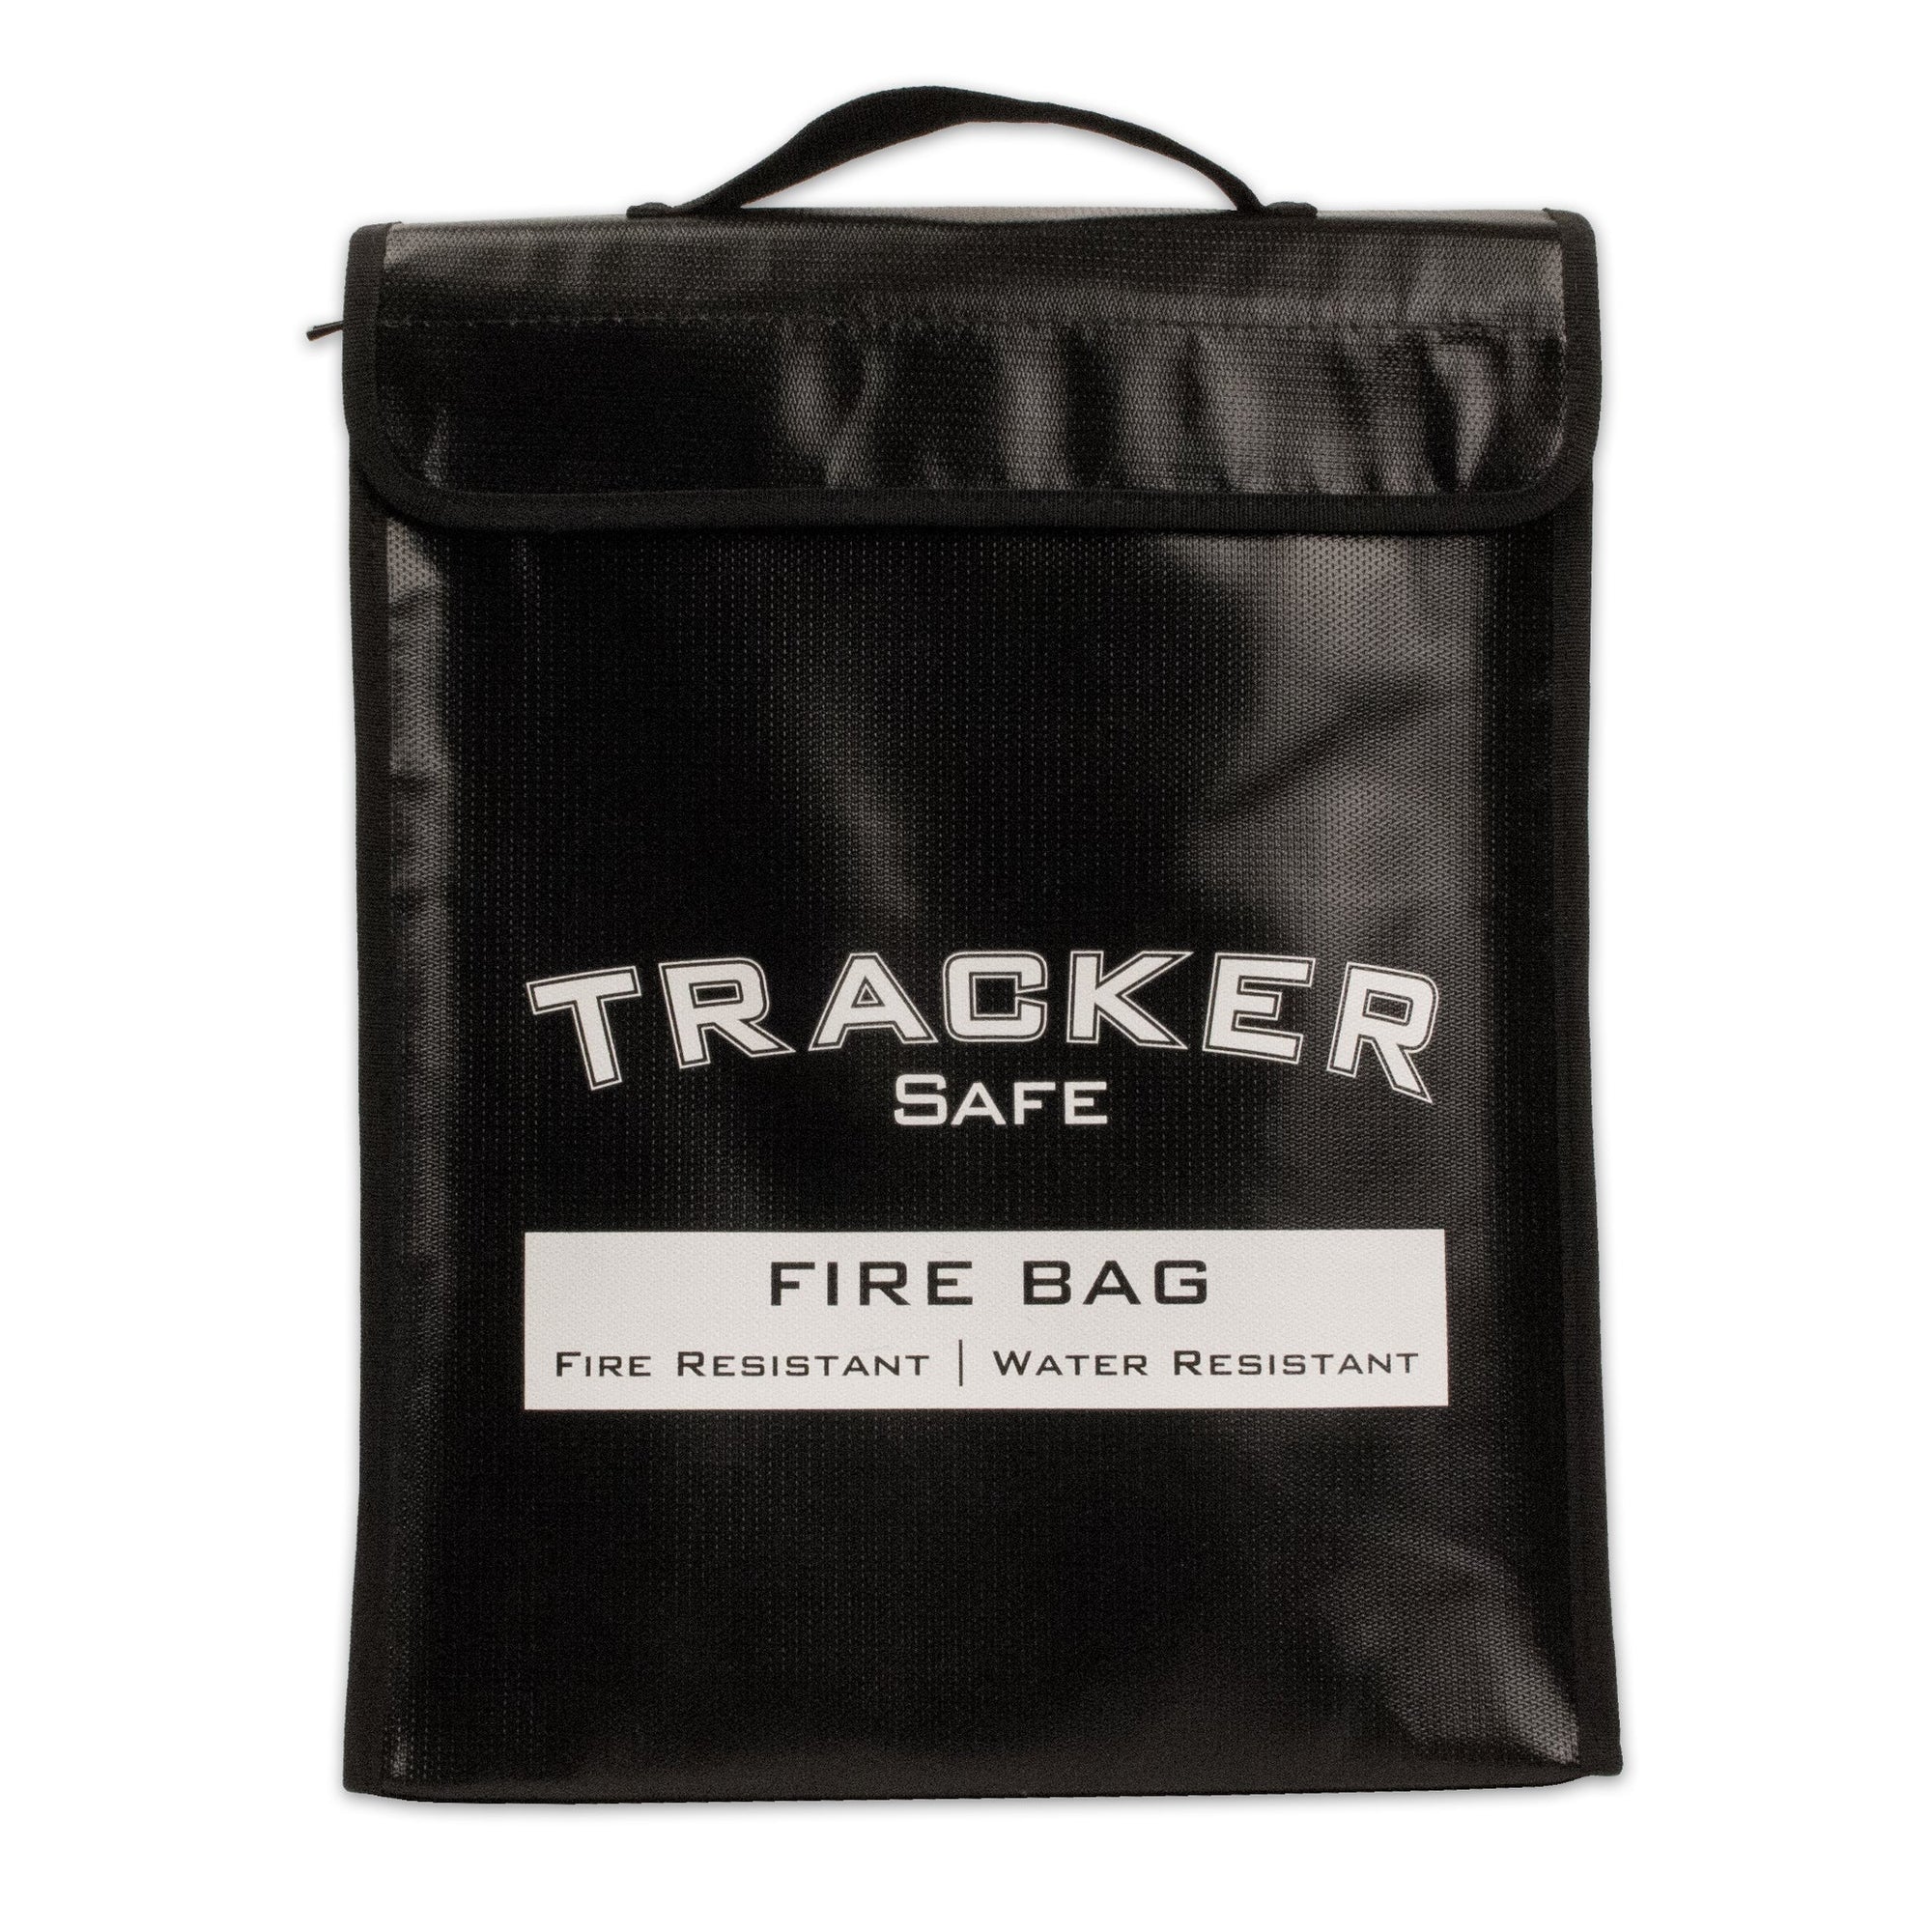 Tracker FB1512 Larger Fire & Water Resistant Bag (15" H x 12" W x 2.5" D)